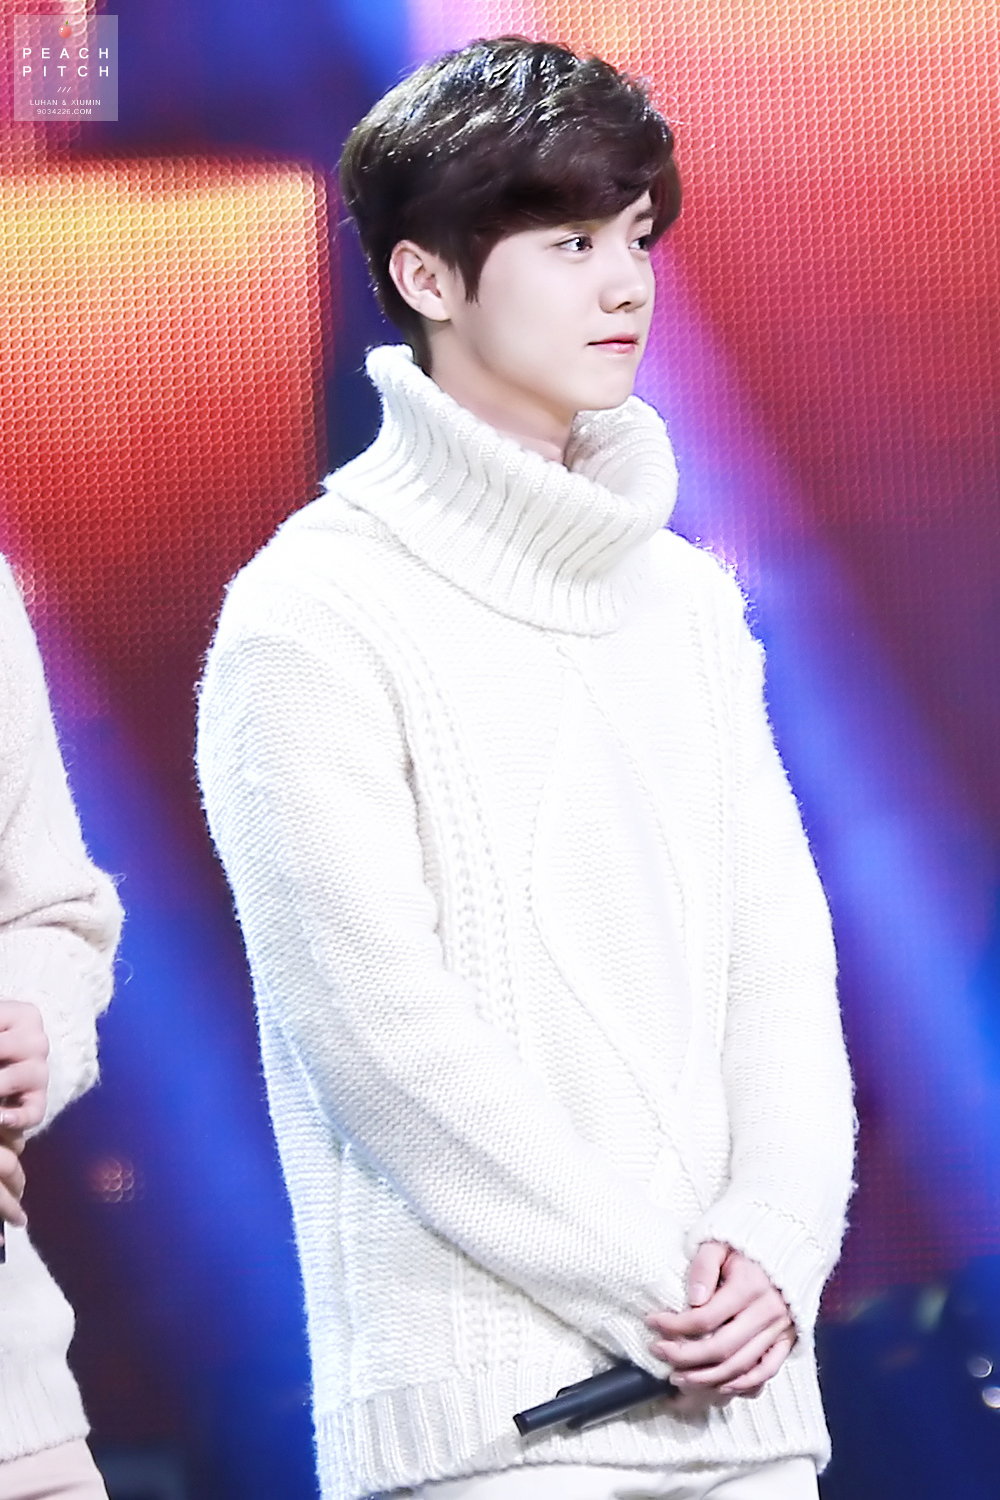 [FANTAKEN] 131215 SBS Inkigayo - Miracle in December [6P] 24480C4F52AD9DB52BC7E8